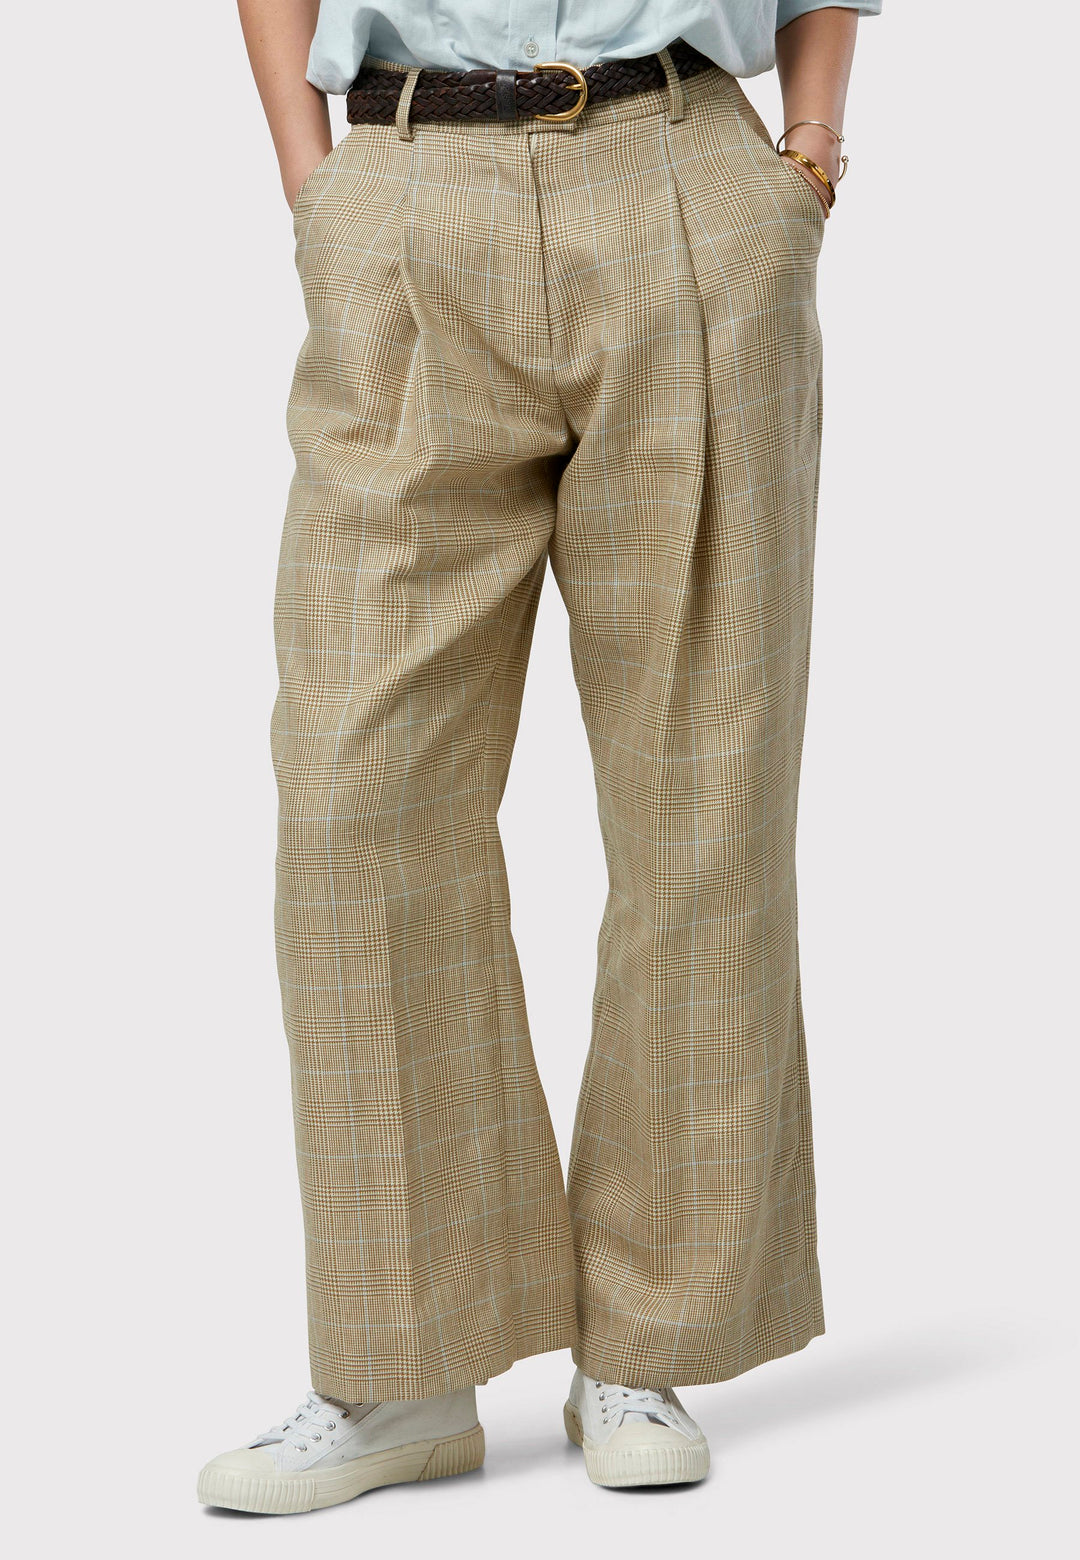 Introducing the Lyra Glencheck Pants: Embrace summer sophistication with these trousers featuring a cream, beige, white, and baby blue tweed pattern. The Lyra Glencheck Pants present a relaxed yet refined silhouette, offering wide-leg styling with pleat front details for added flair. Crafted from a premium tweed blend, they strike the perfect balance between comfort and style.